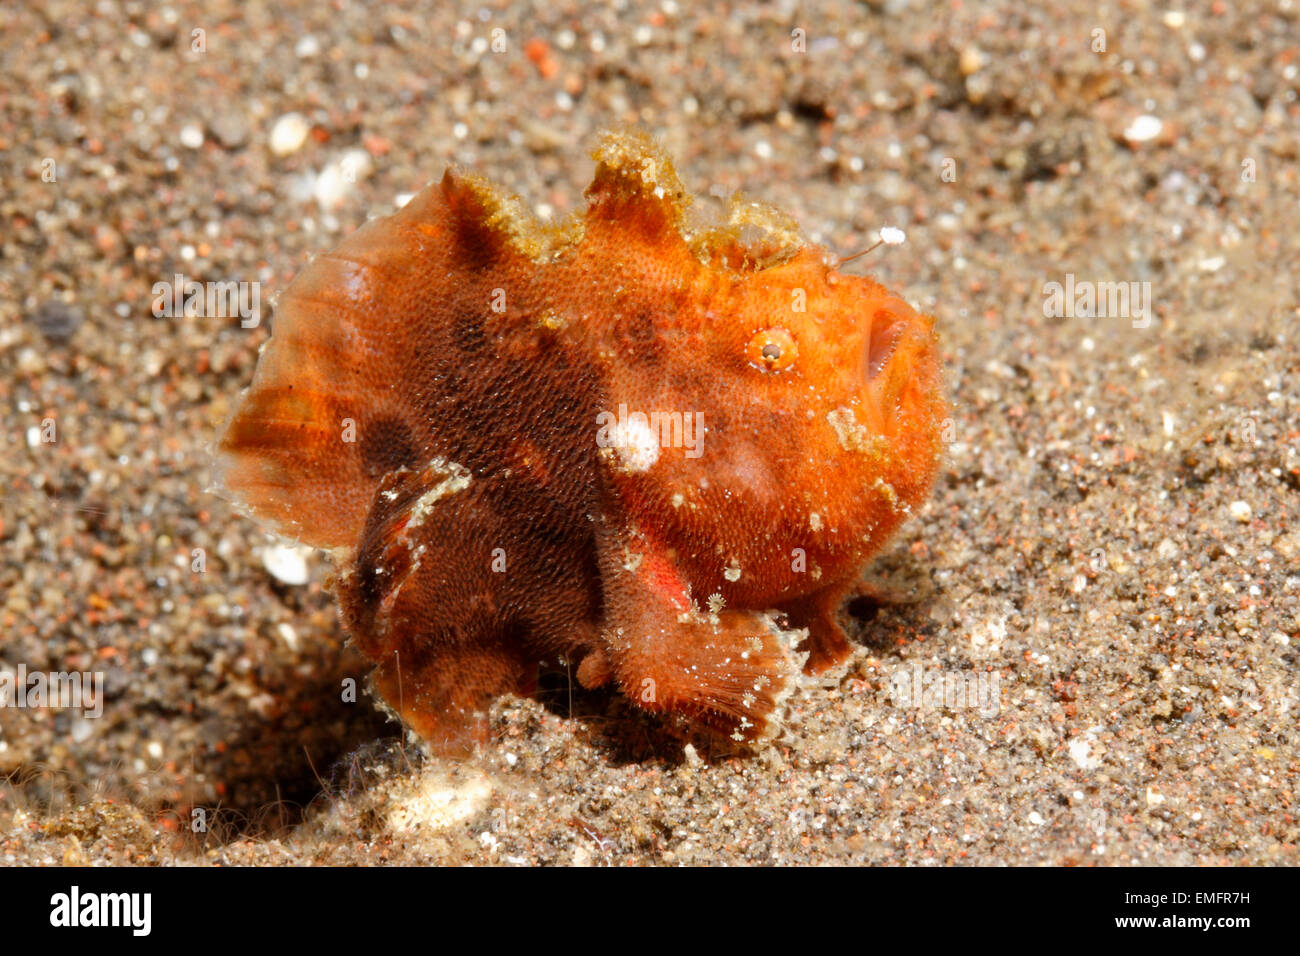 Frogfish, Antennatus sp. The fish has its illicium (rod) out and the esca (lure) can be seen.Tulamben, Bali, Indonesia. Bali Sea Stock Photo